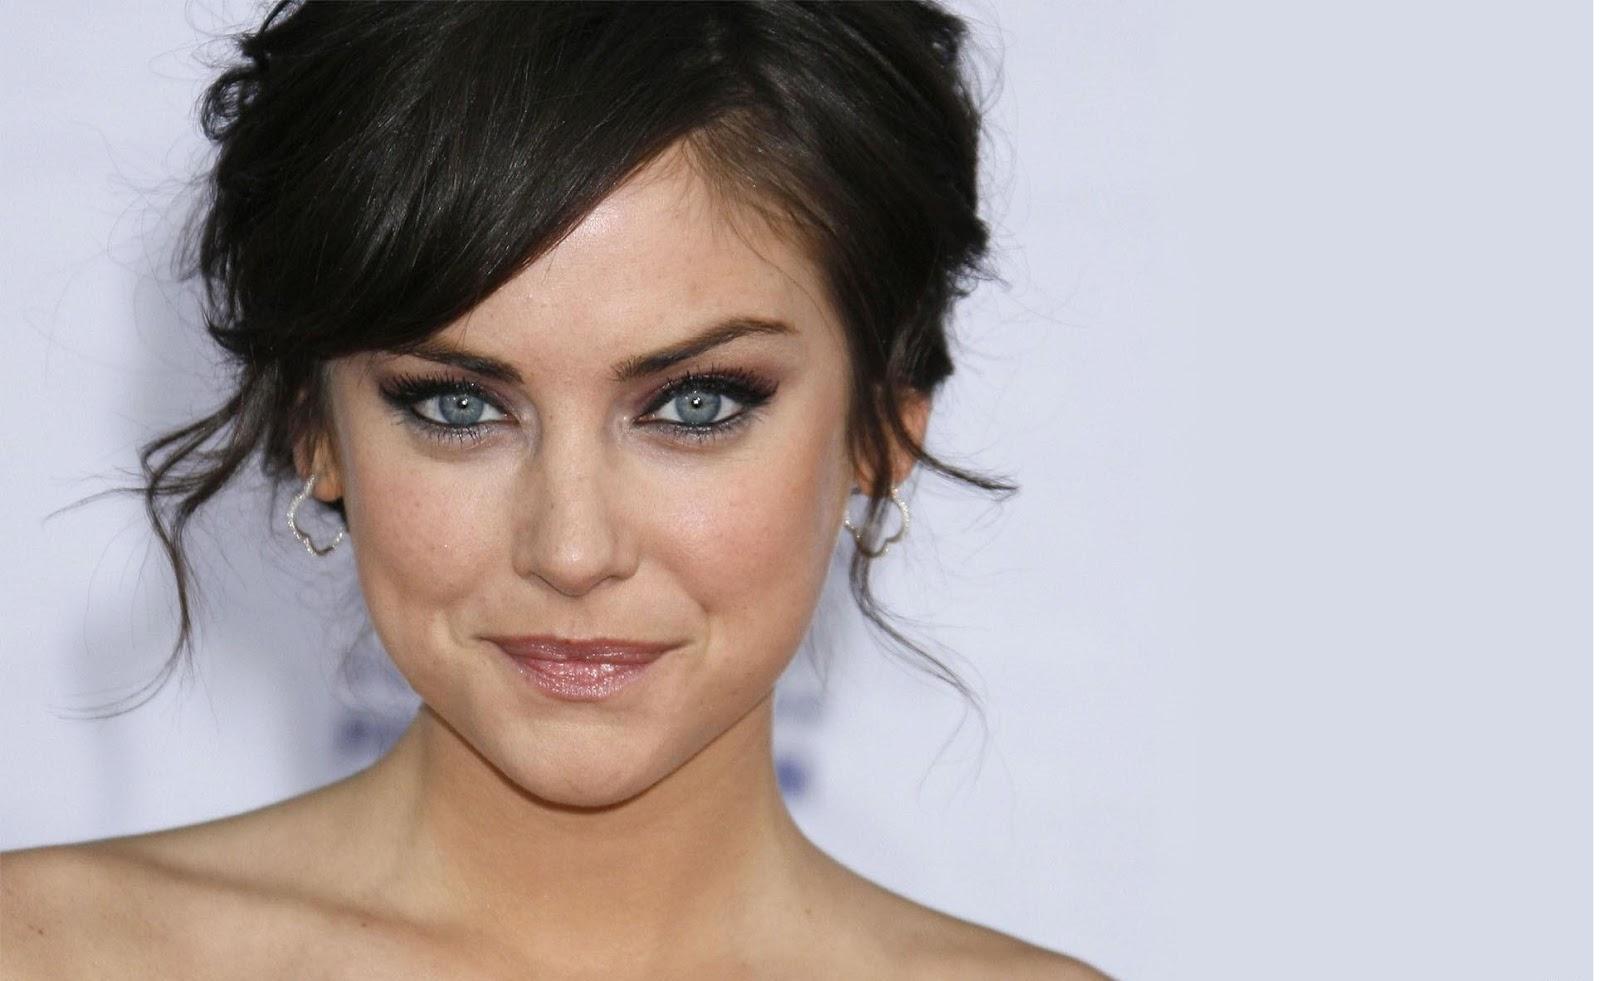 Theroyalspeaker: Jessica Stroup HD Wallpaper Free Download